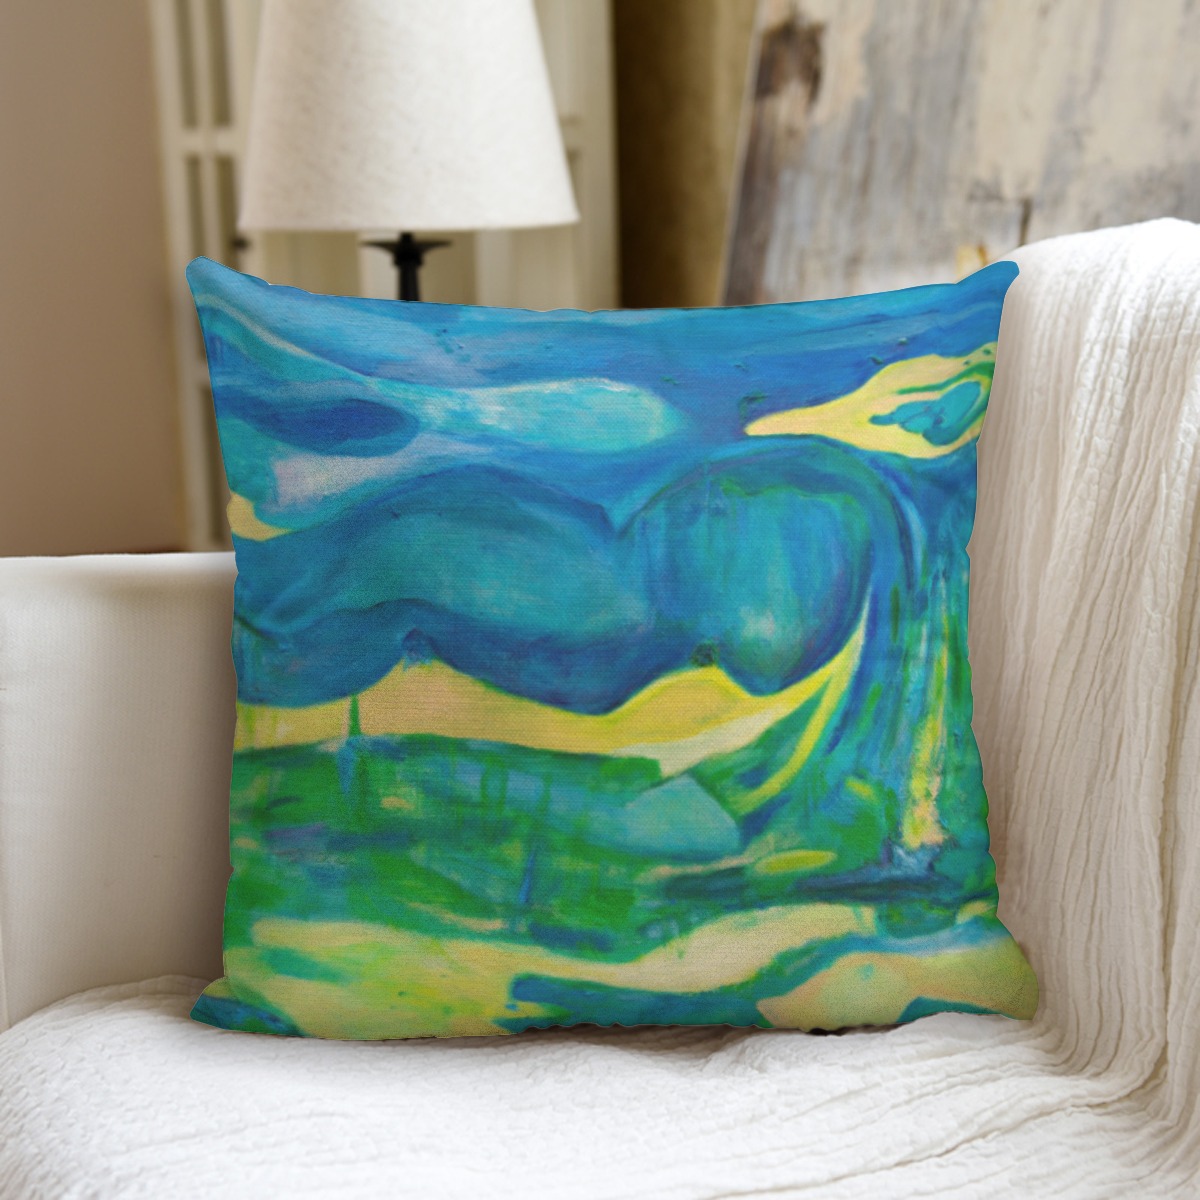 Couch Pillow With Pillow Insert Under The Sea Collection